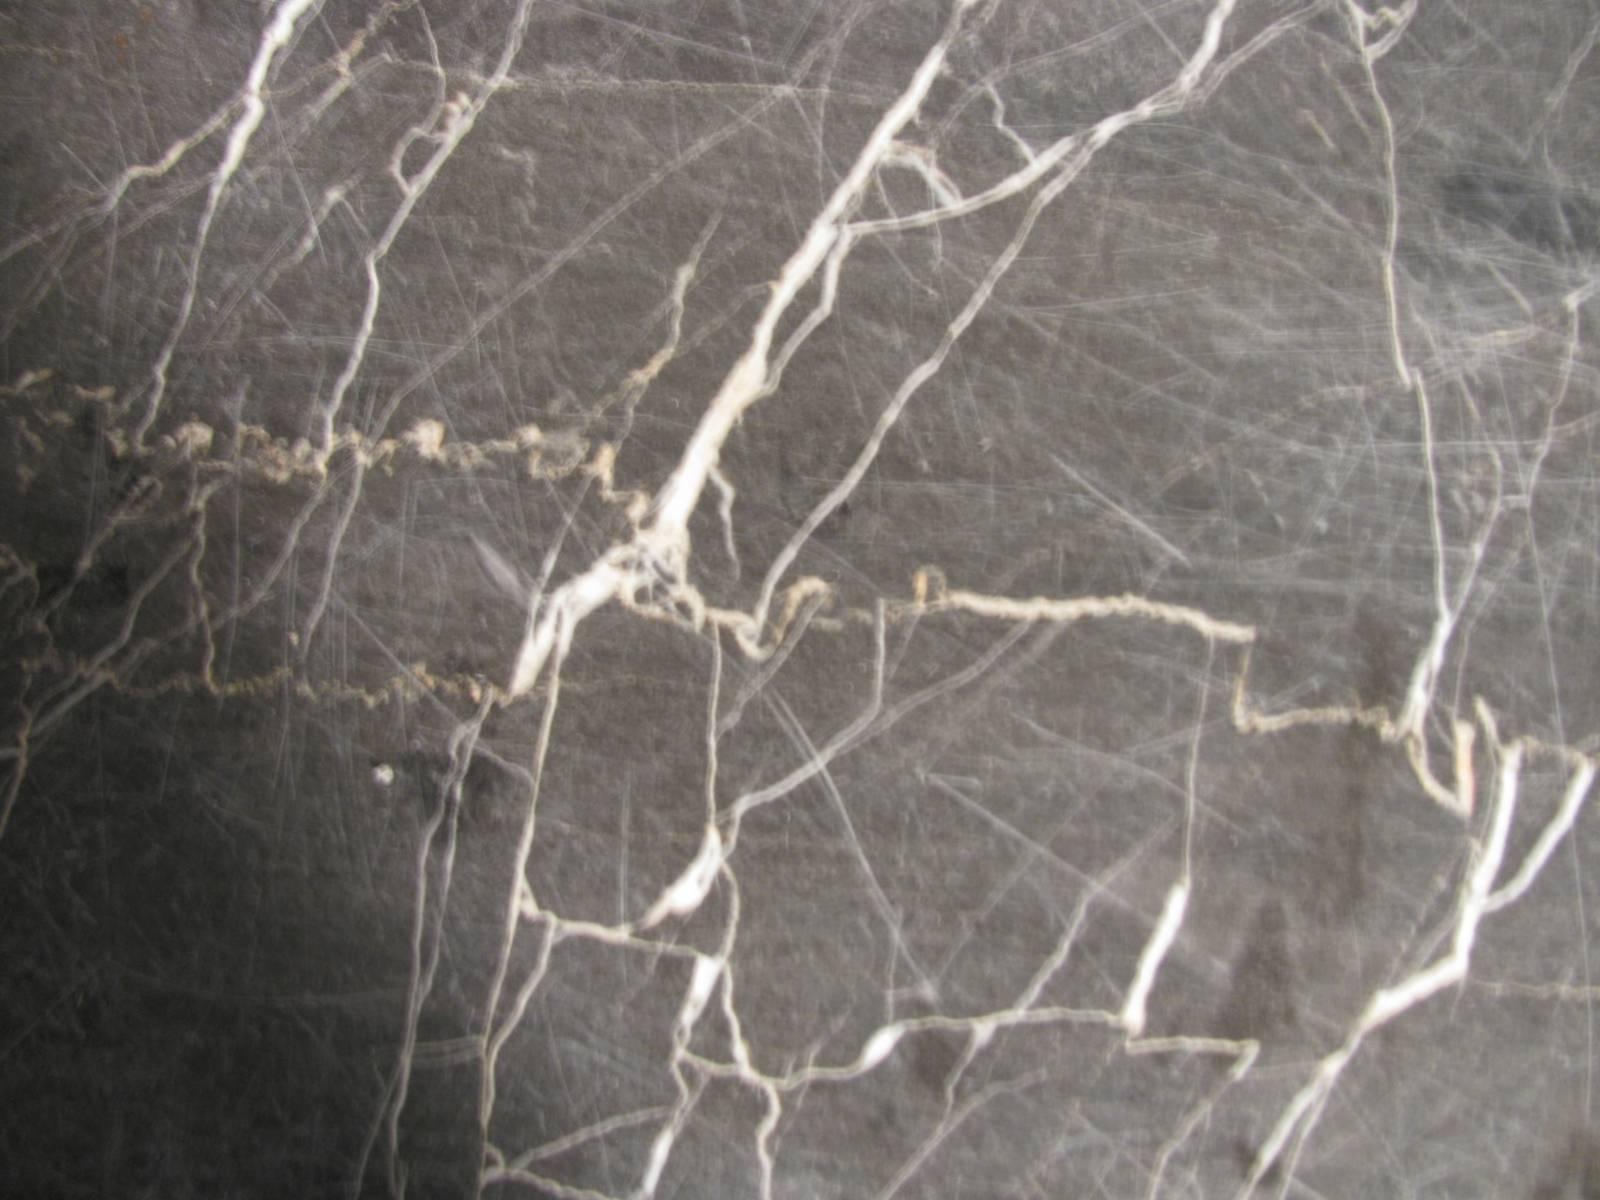 Heavily veined dark grey marble 1 inch thick which sits atop a cast iron base in the form of dolphins. Base and top are not connected, the base has wide flanges which support the marble. We have used outdoor Velcro with great satisfaction in the